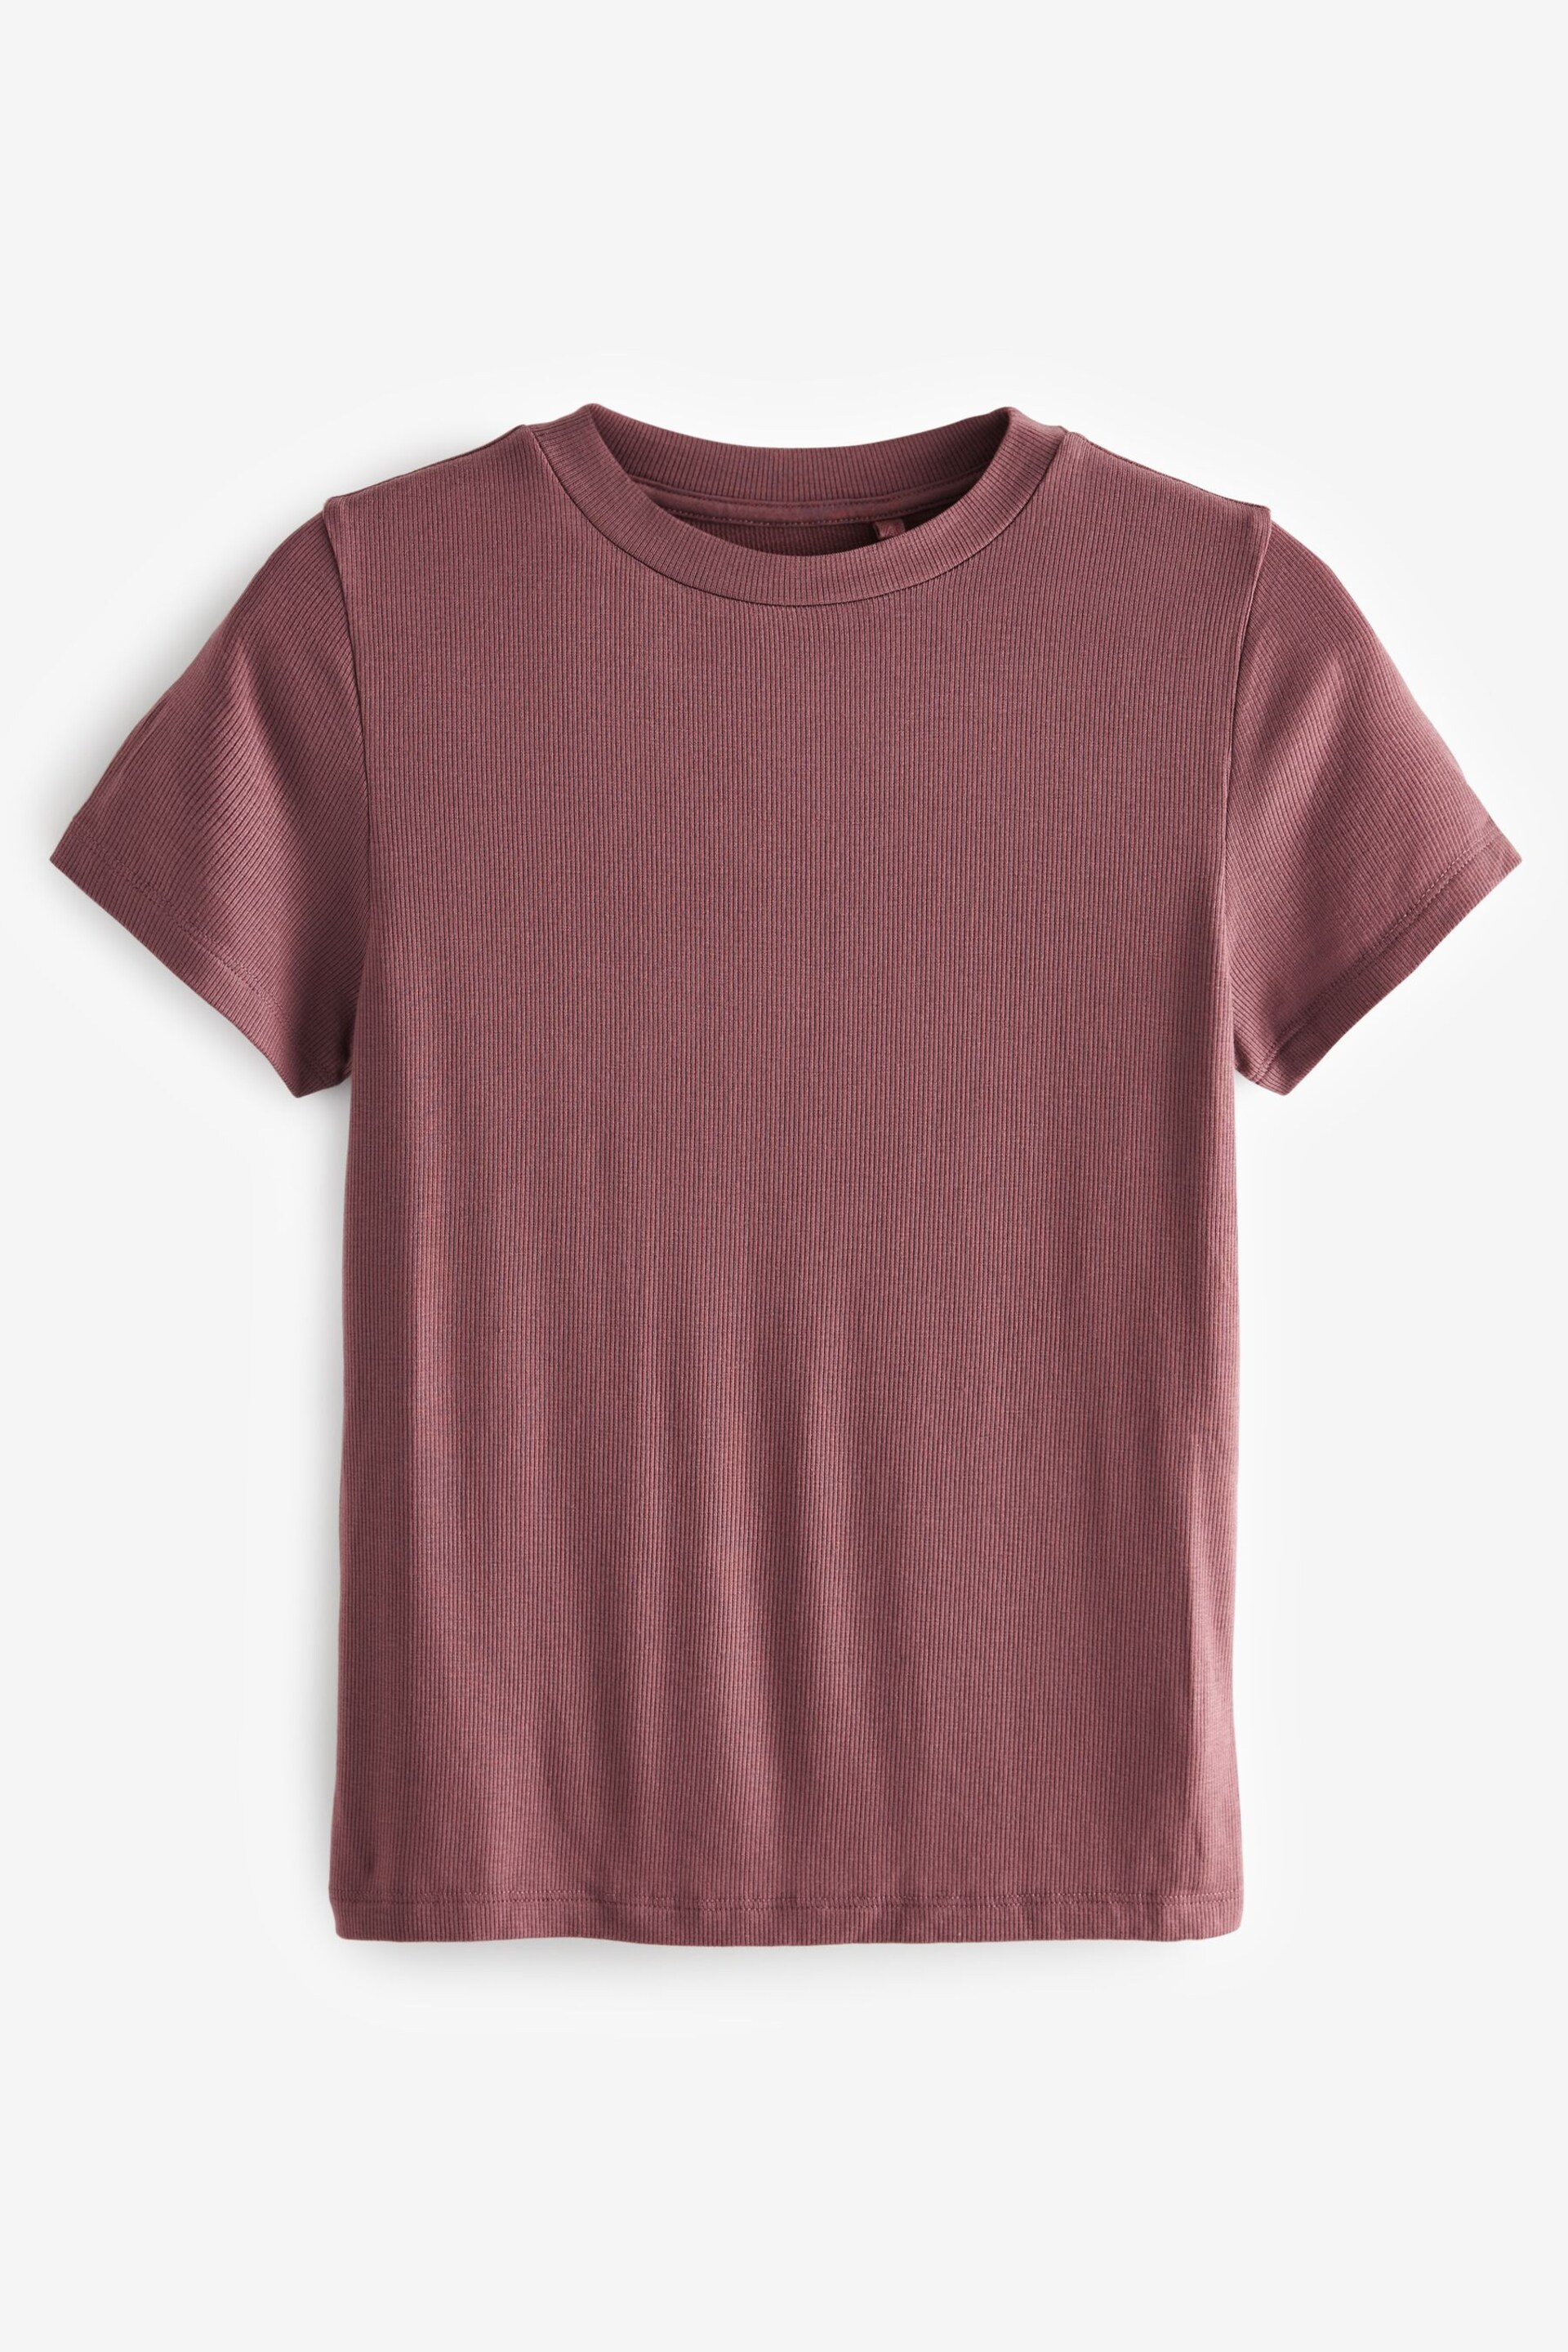 Rose Pink Soft Touch Ribbed Short Sleeve T-Shirt with TENCEL™ Lyocell - Image 6 of 7